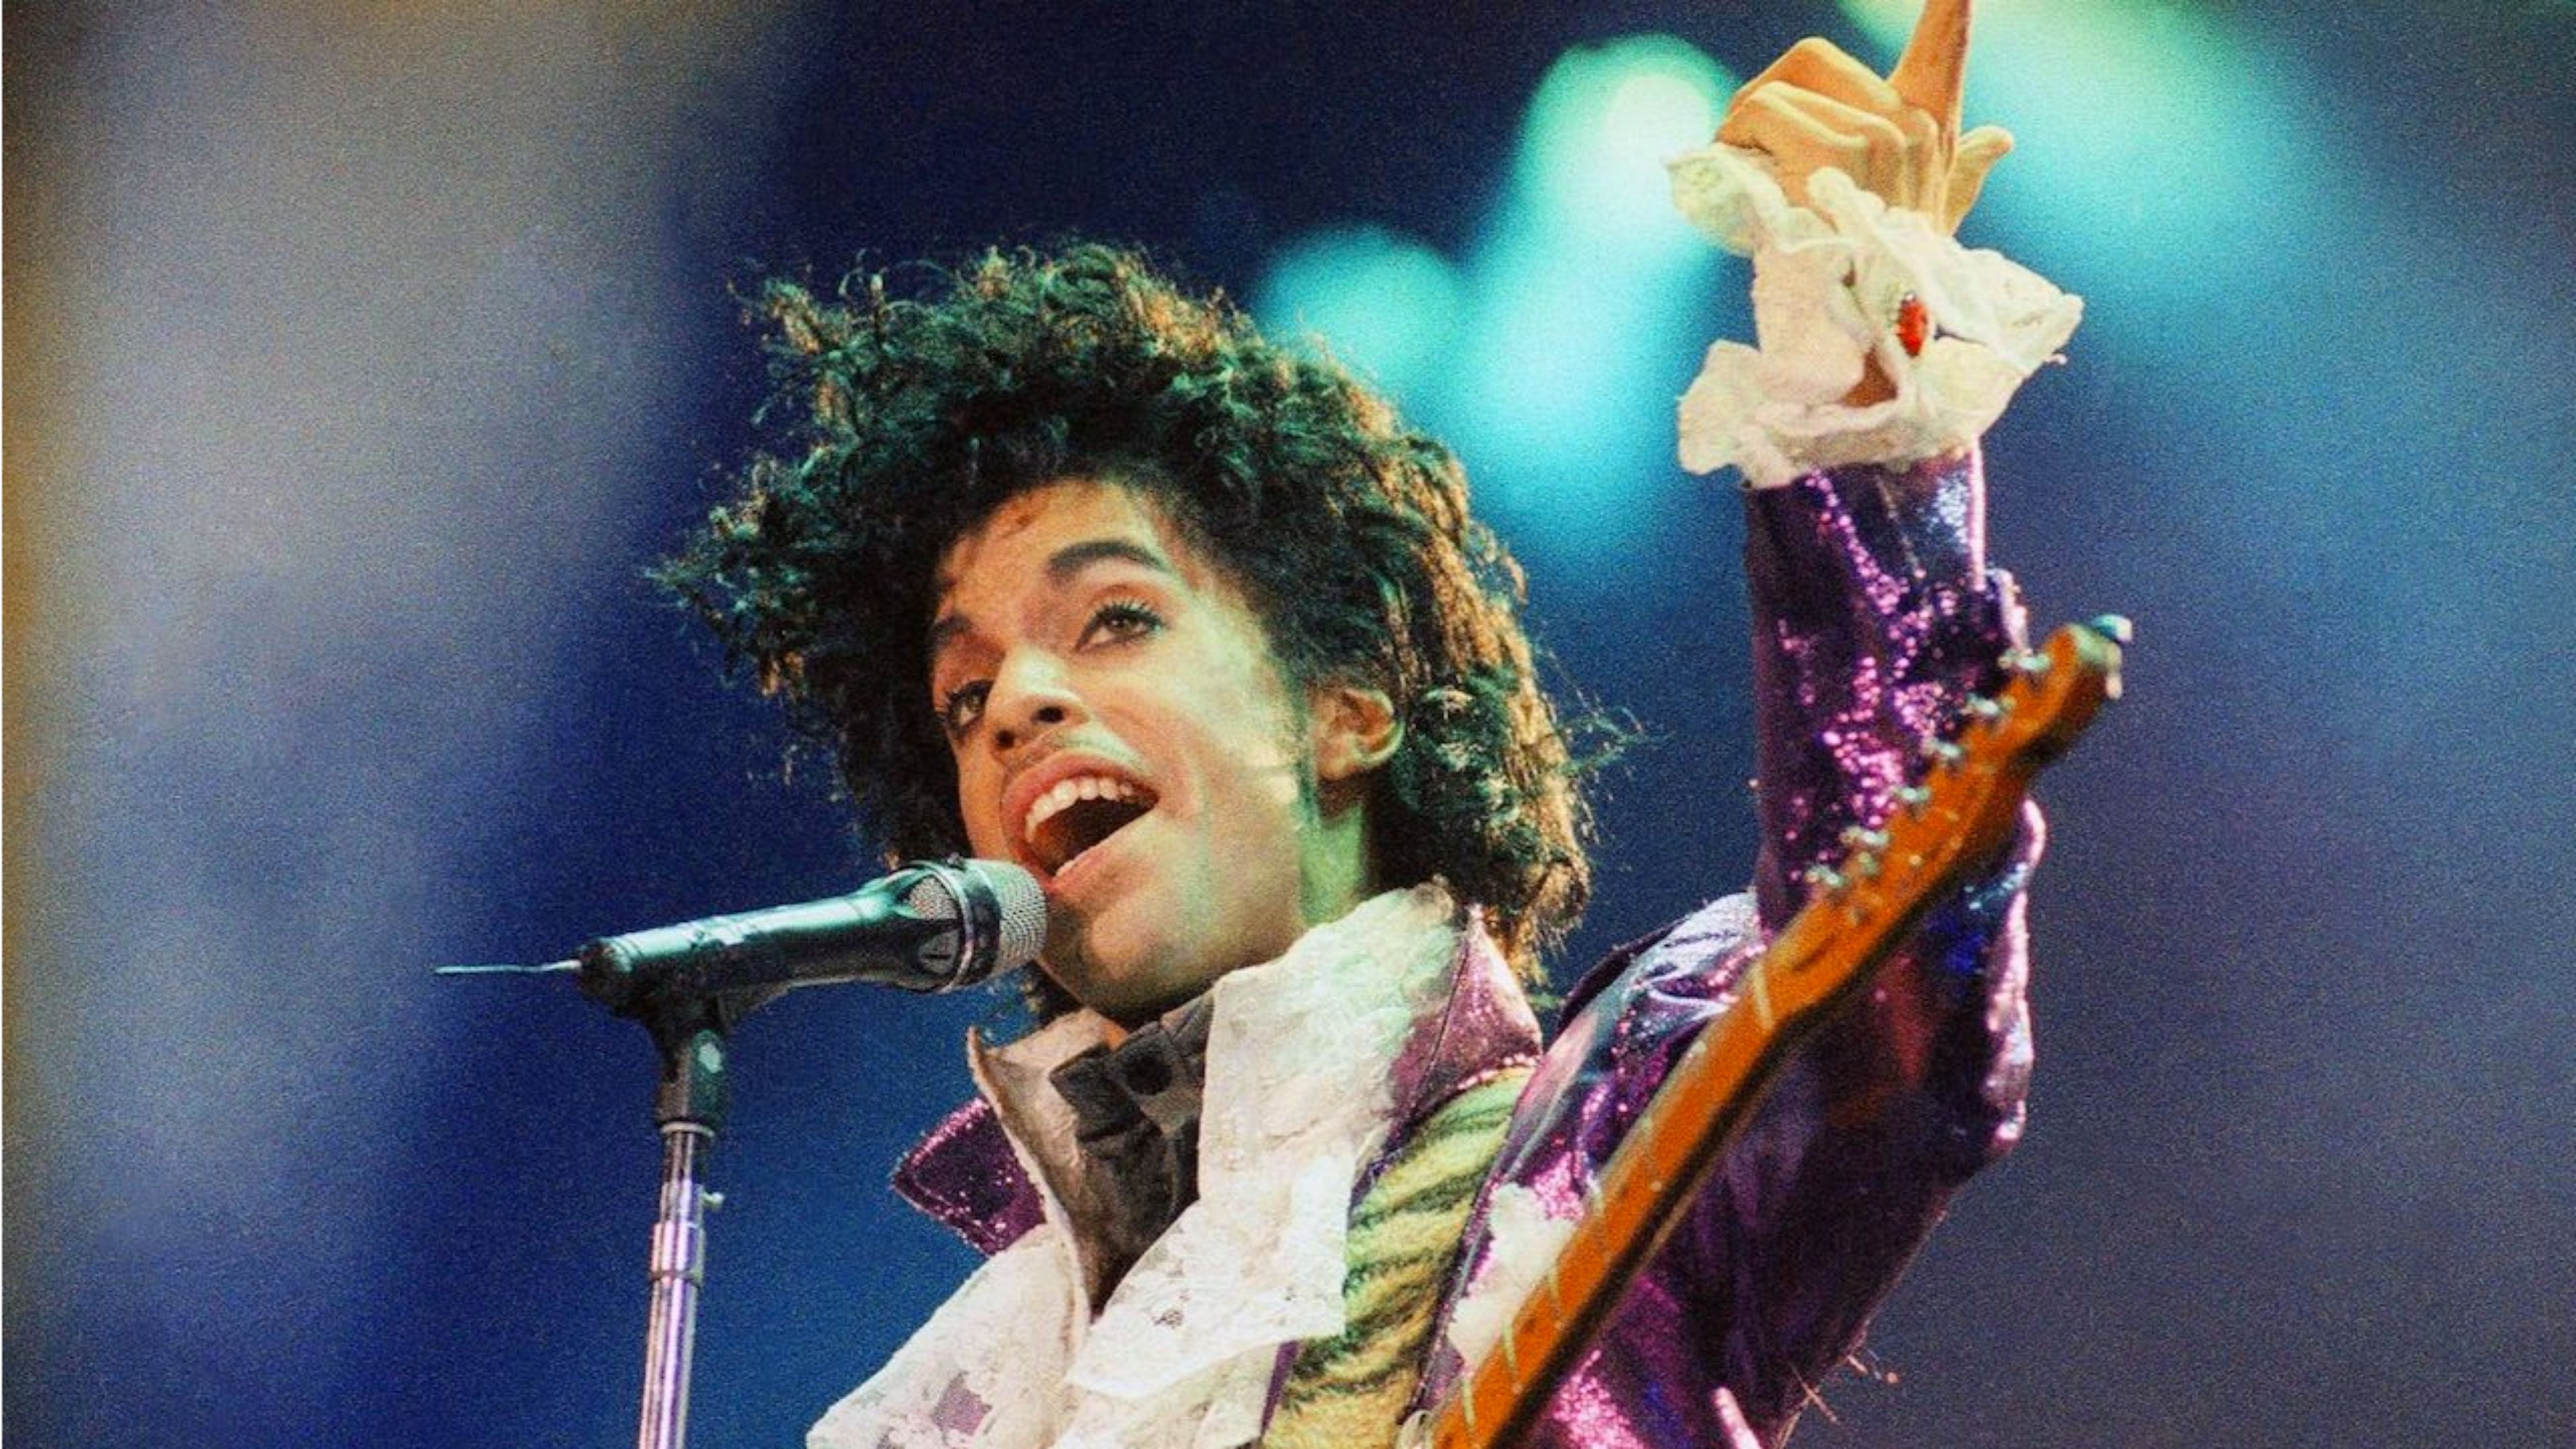 Prince Wallpaper Free Prince Background